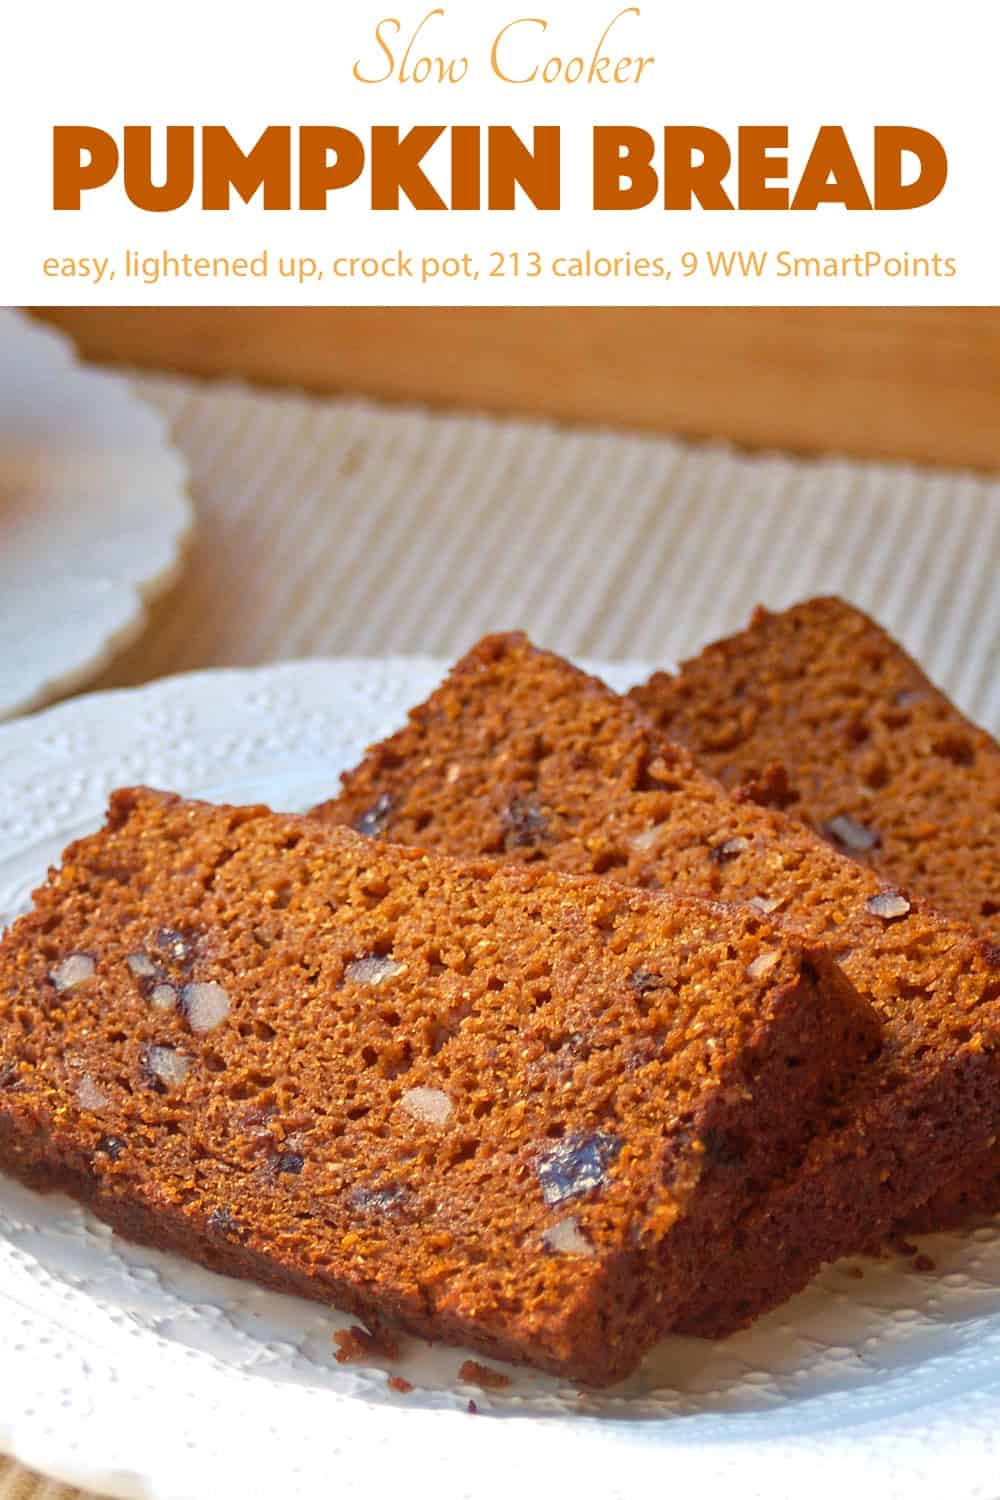 Fresh sliced pumpkin bread with raisins and nuts on a white plate.